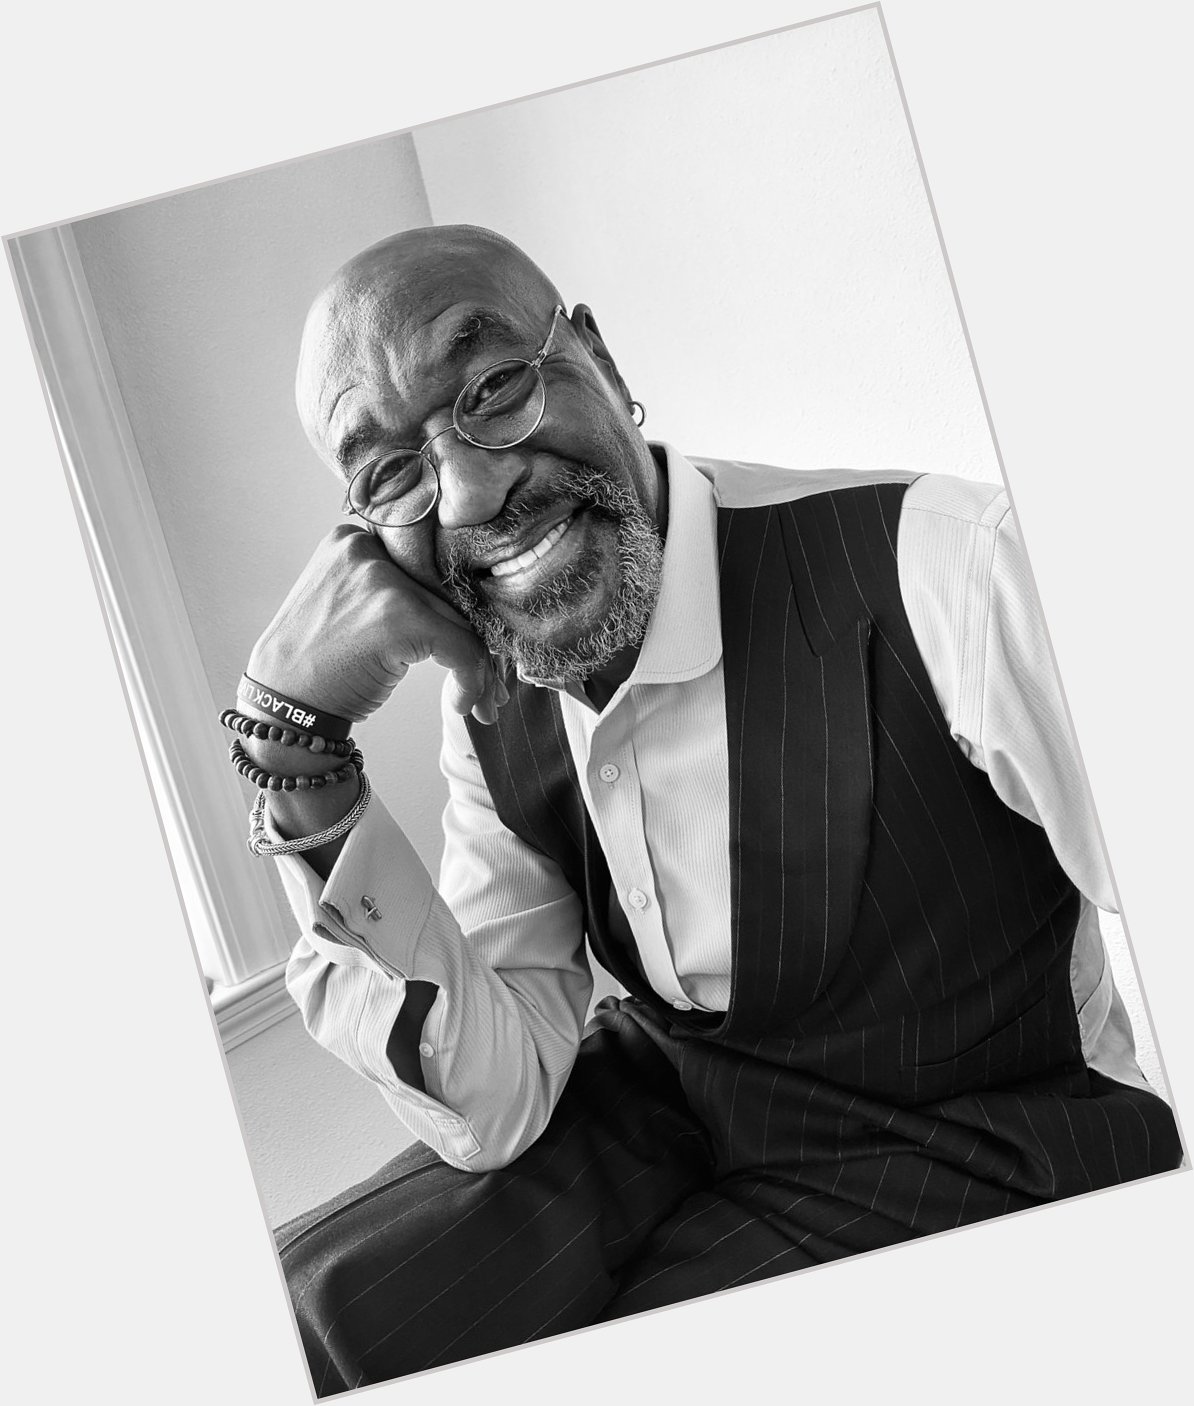 Happy Birthday once again, Delroy Lindo! 